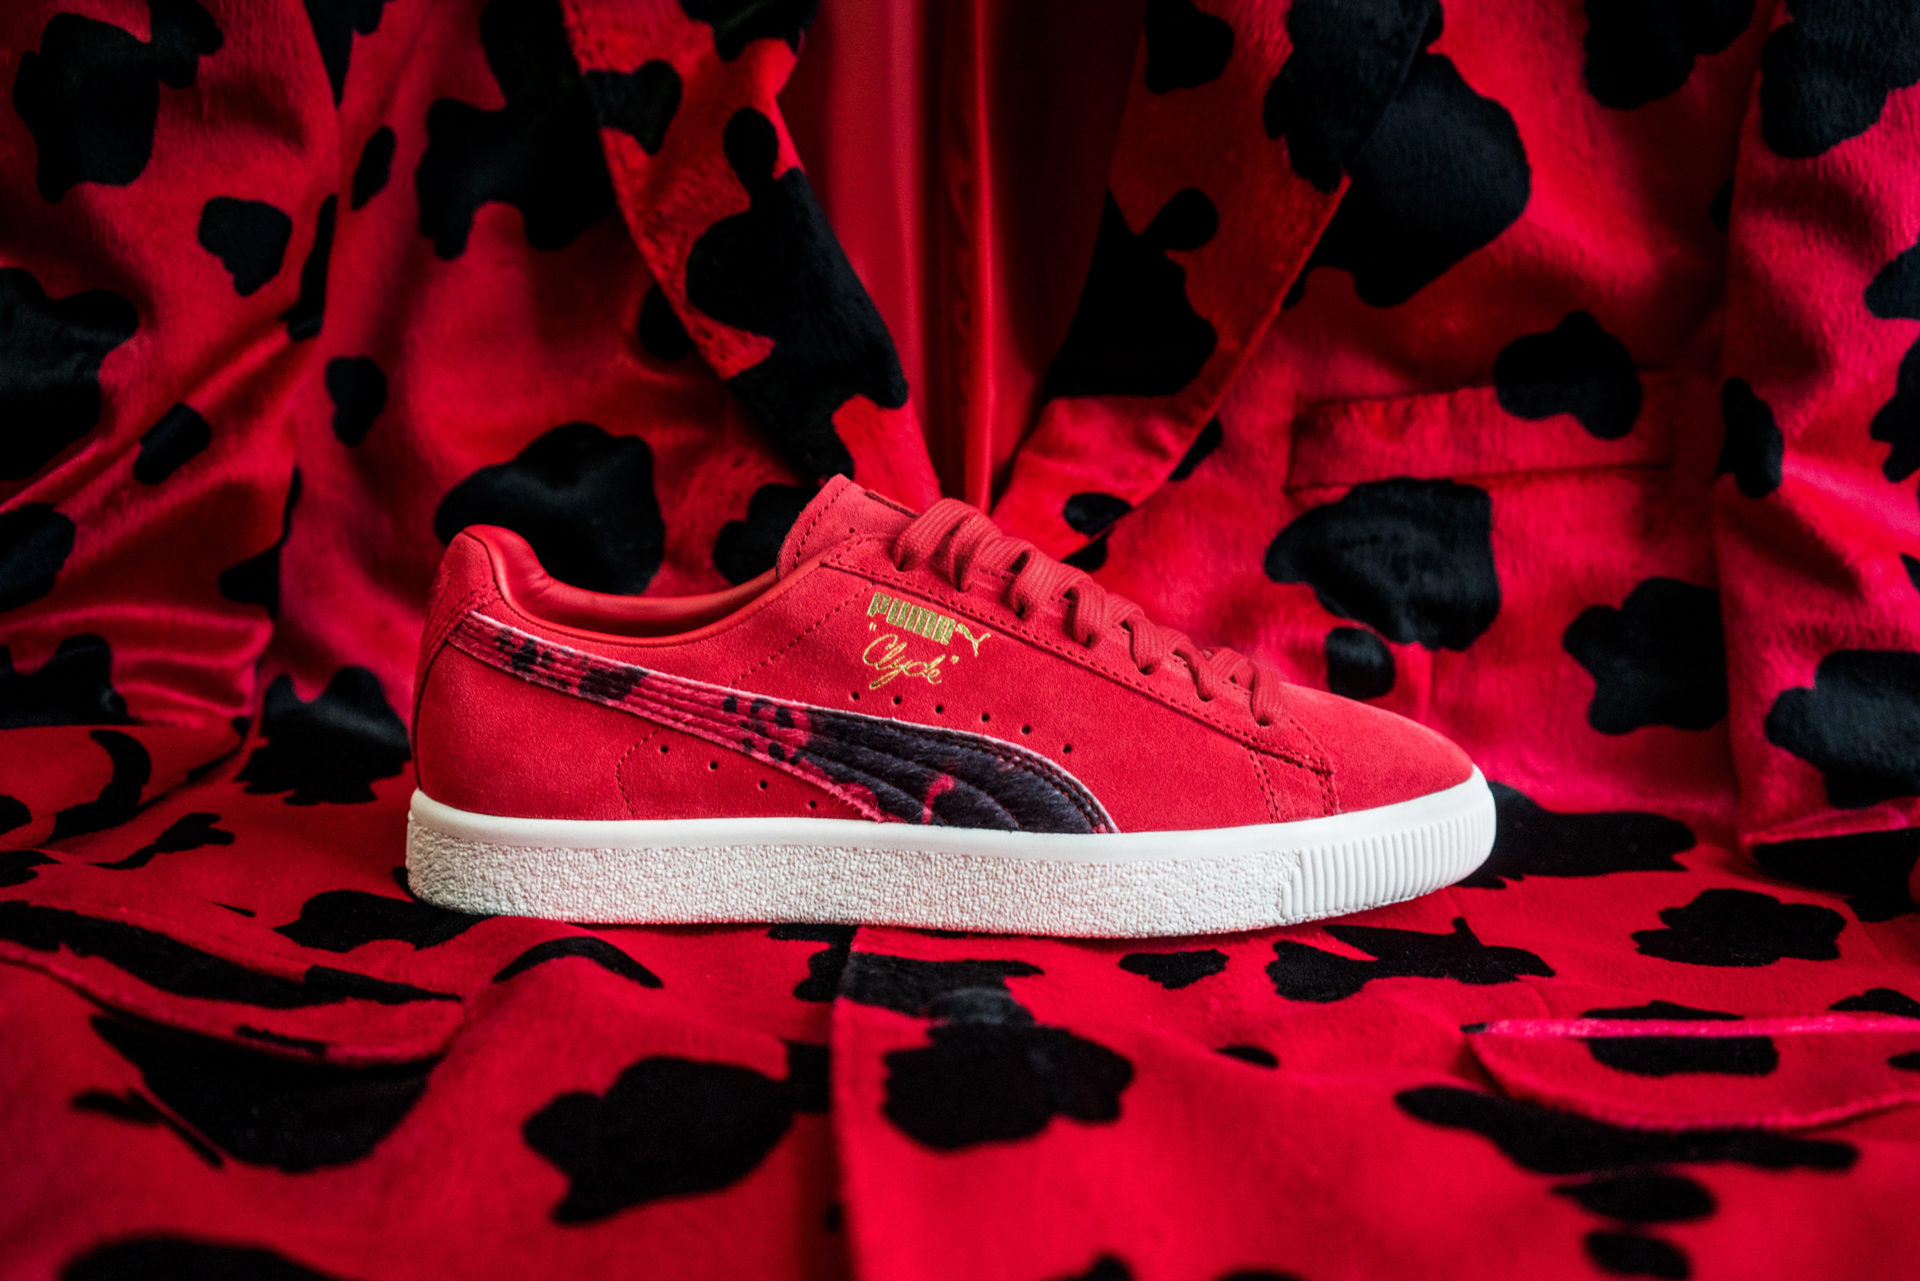 Packer x Puma Clyde “Cow Suits” Pack